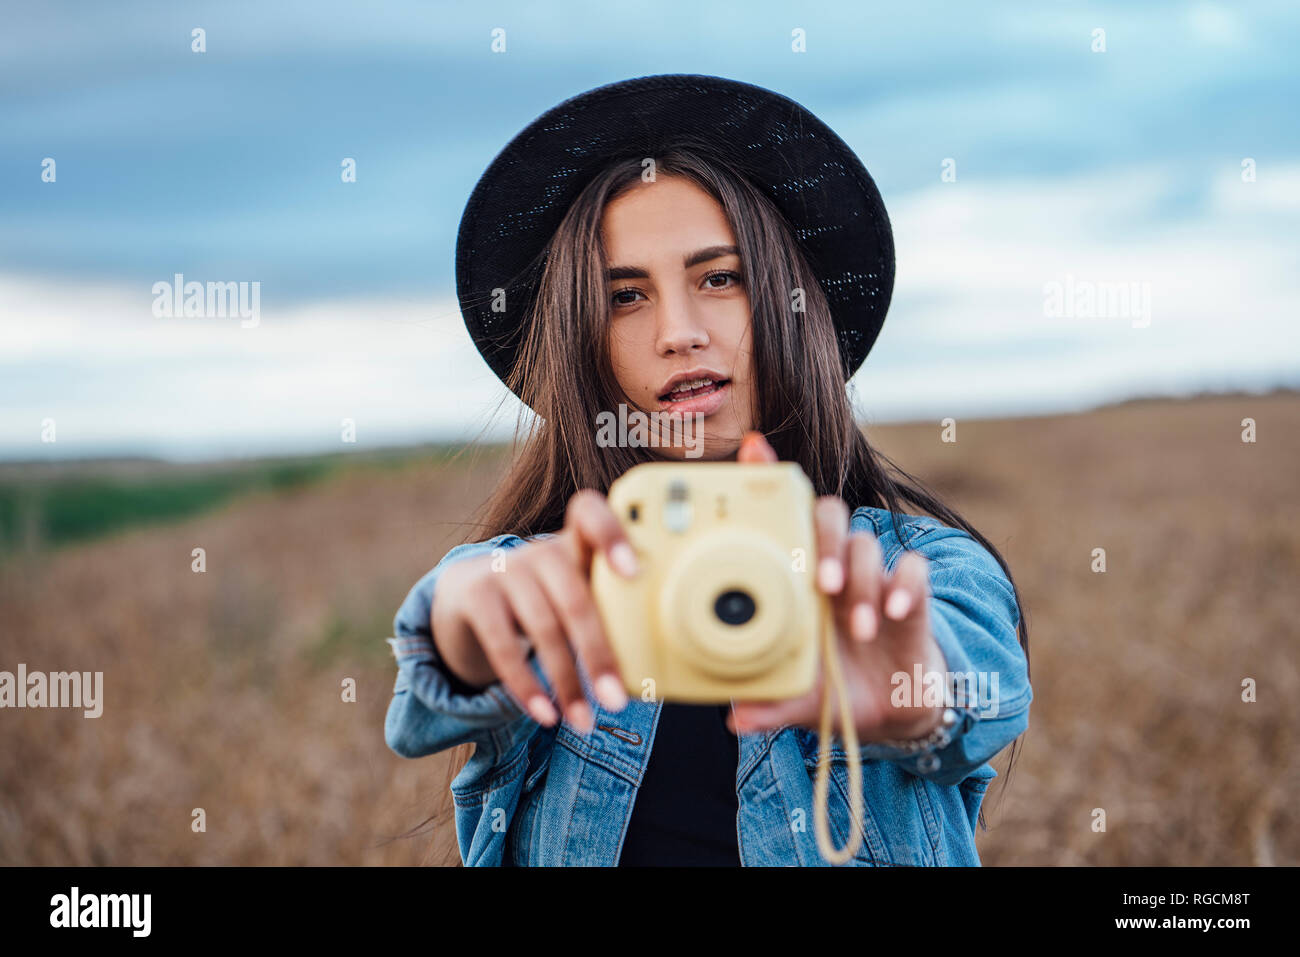 Portrait of young woman taking photo of viewer Stock Photo